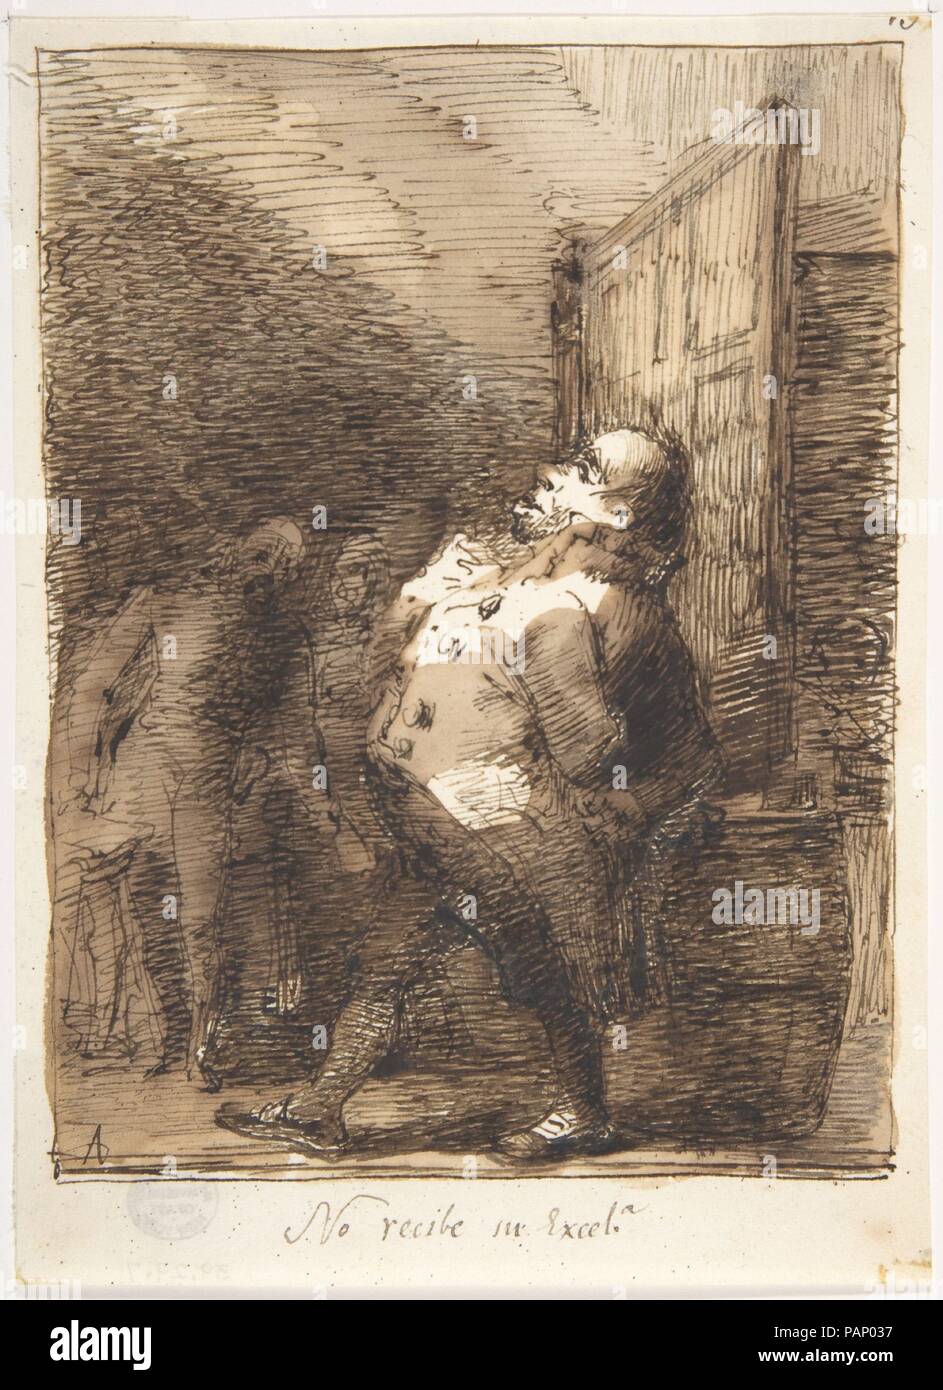 His Excellency is Not at Home ('No recibe in Excel.ª'). Artist: Leonardo Alenza y Nieto (Spanish, Madrid 1807-1845 Madrid). Dimensions: 7-1/8 x 5-1/8 in.  (18.1 x 13.0 cm). Date: 1807-45. Museum: Metropolitan Museum of Art, New York, USA. Stock Photo